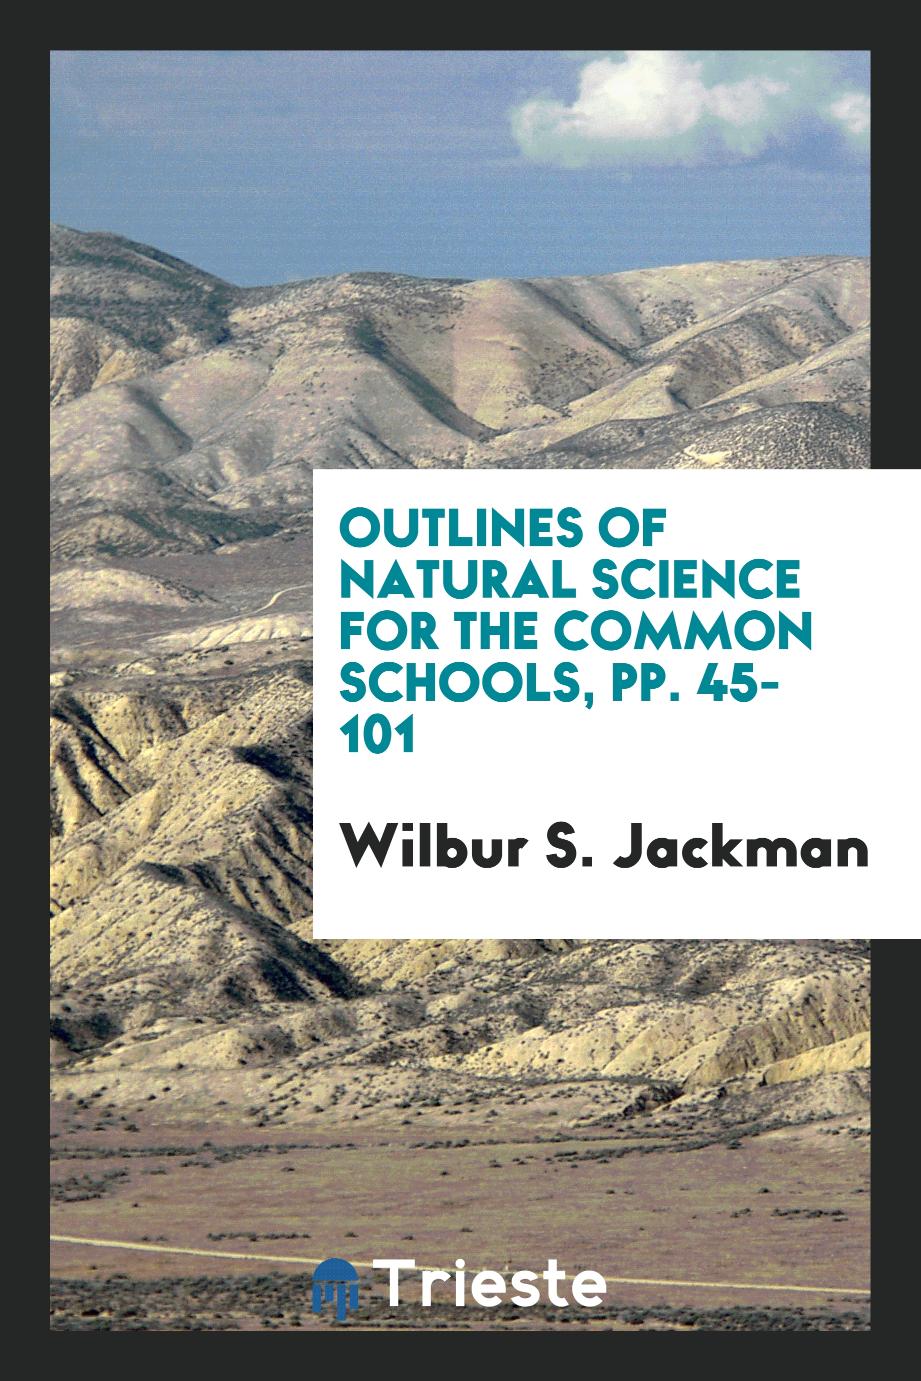 Outlines of Natural Science for the Common Schools, pp. 45-101